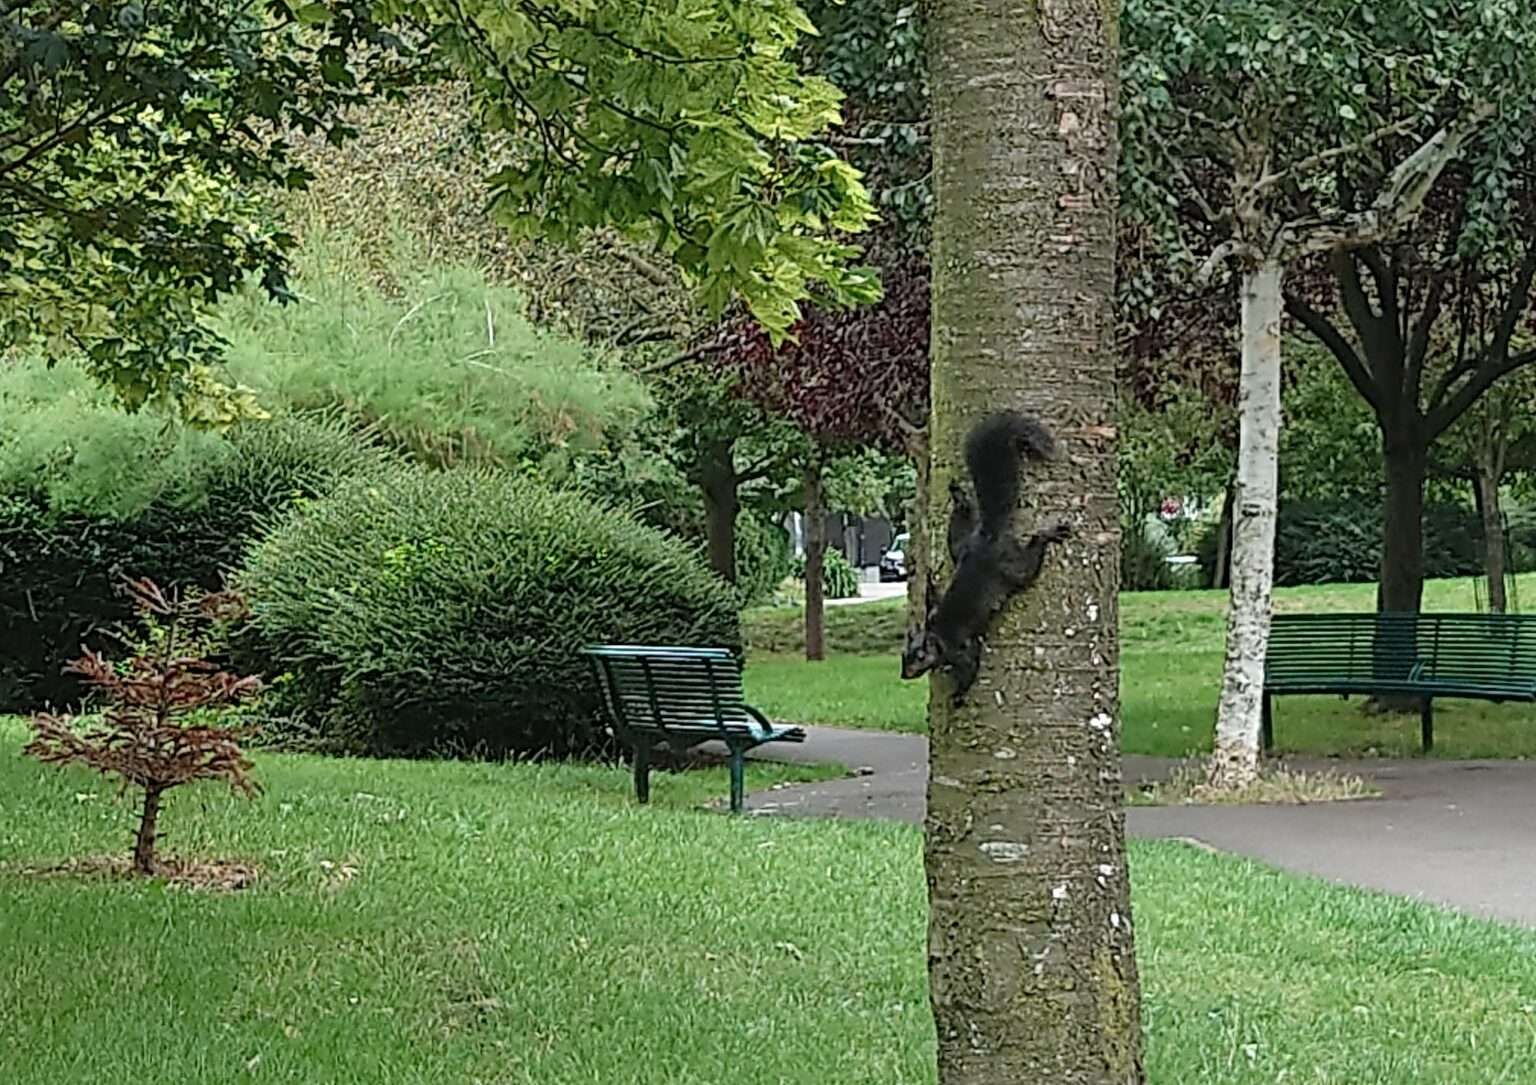 The black squirrel. Credit: Henry Long